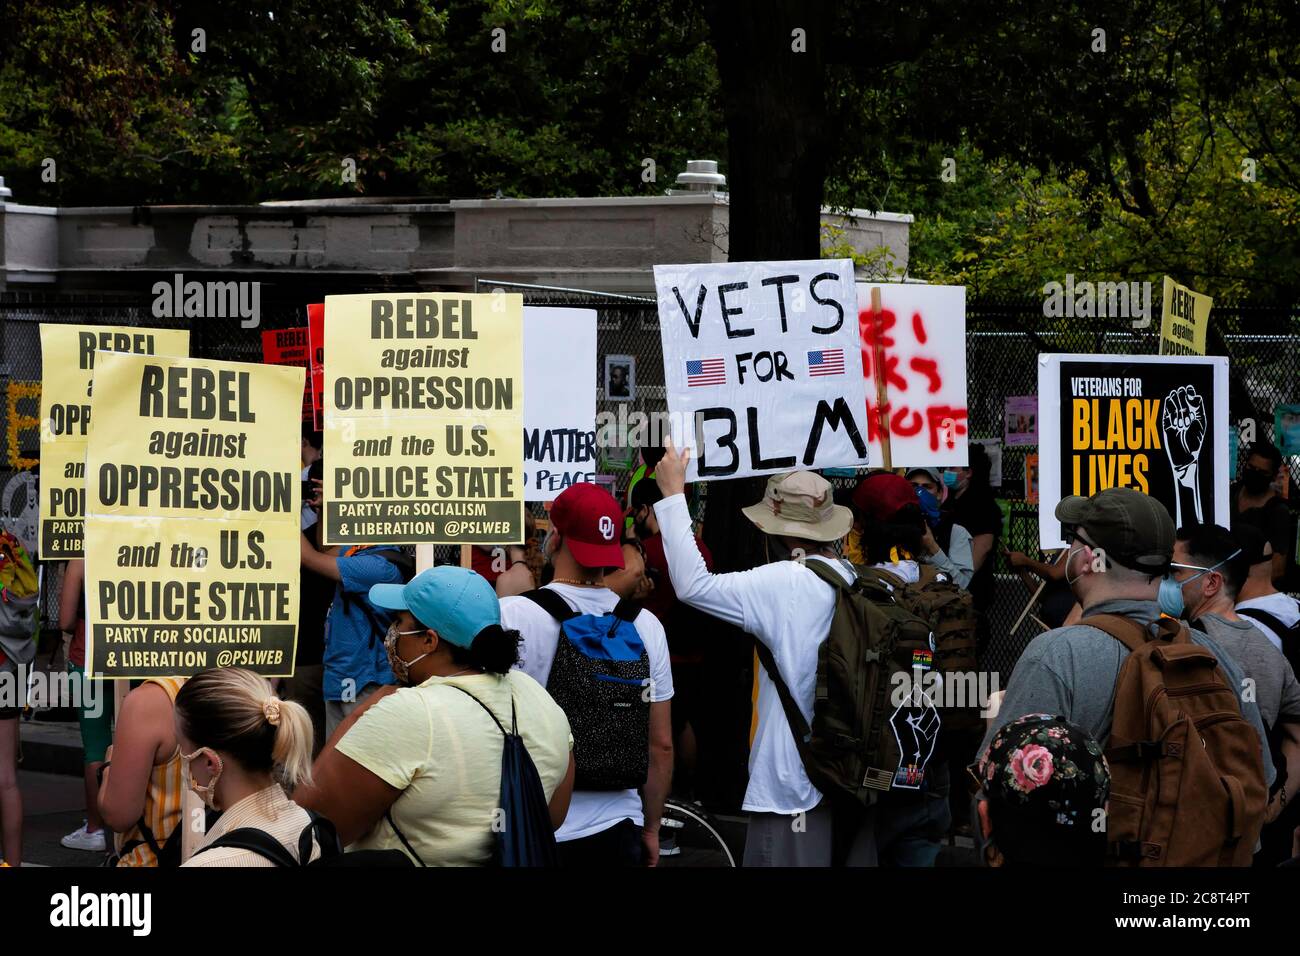 Military veterans and protesters hold signs to support black lives and free speech at March Against Trump's Police State, Washington, DC, United State Stock Photo